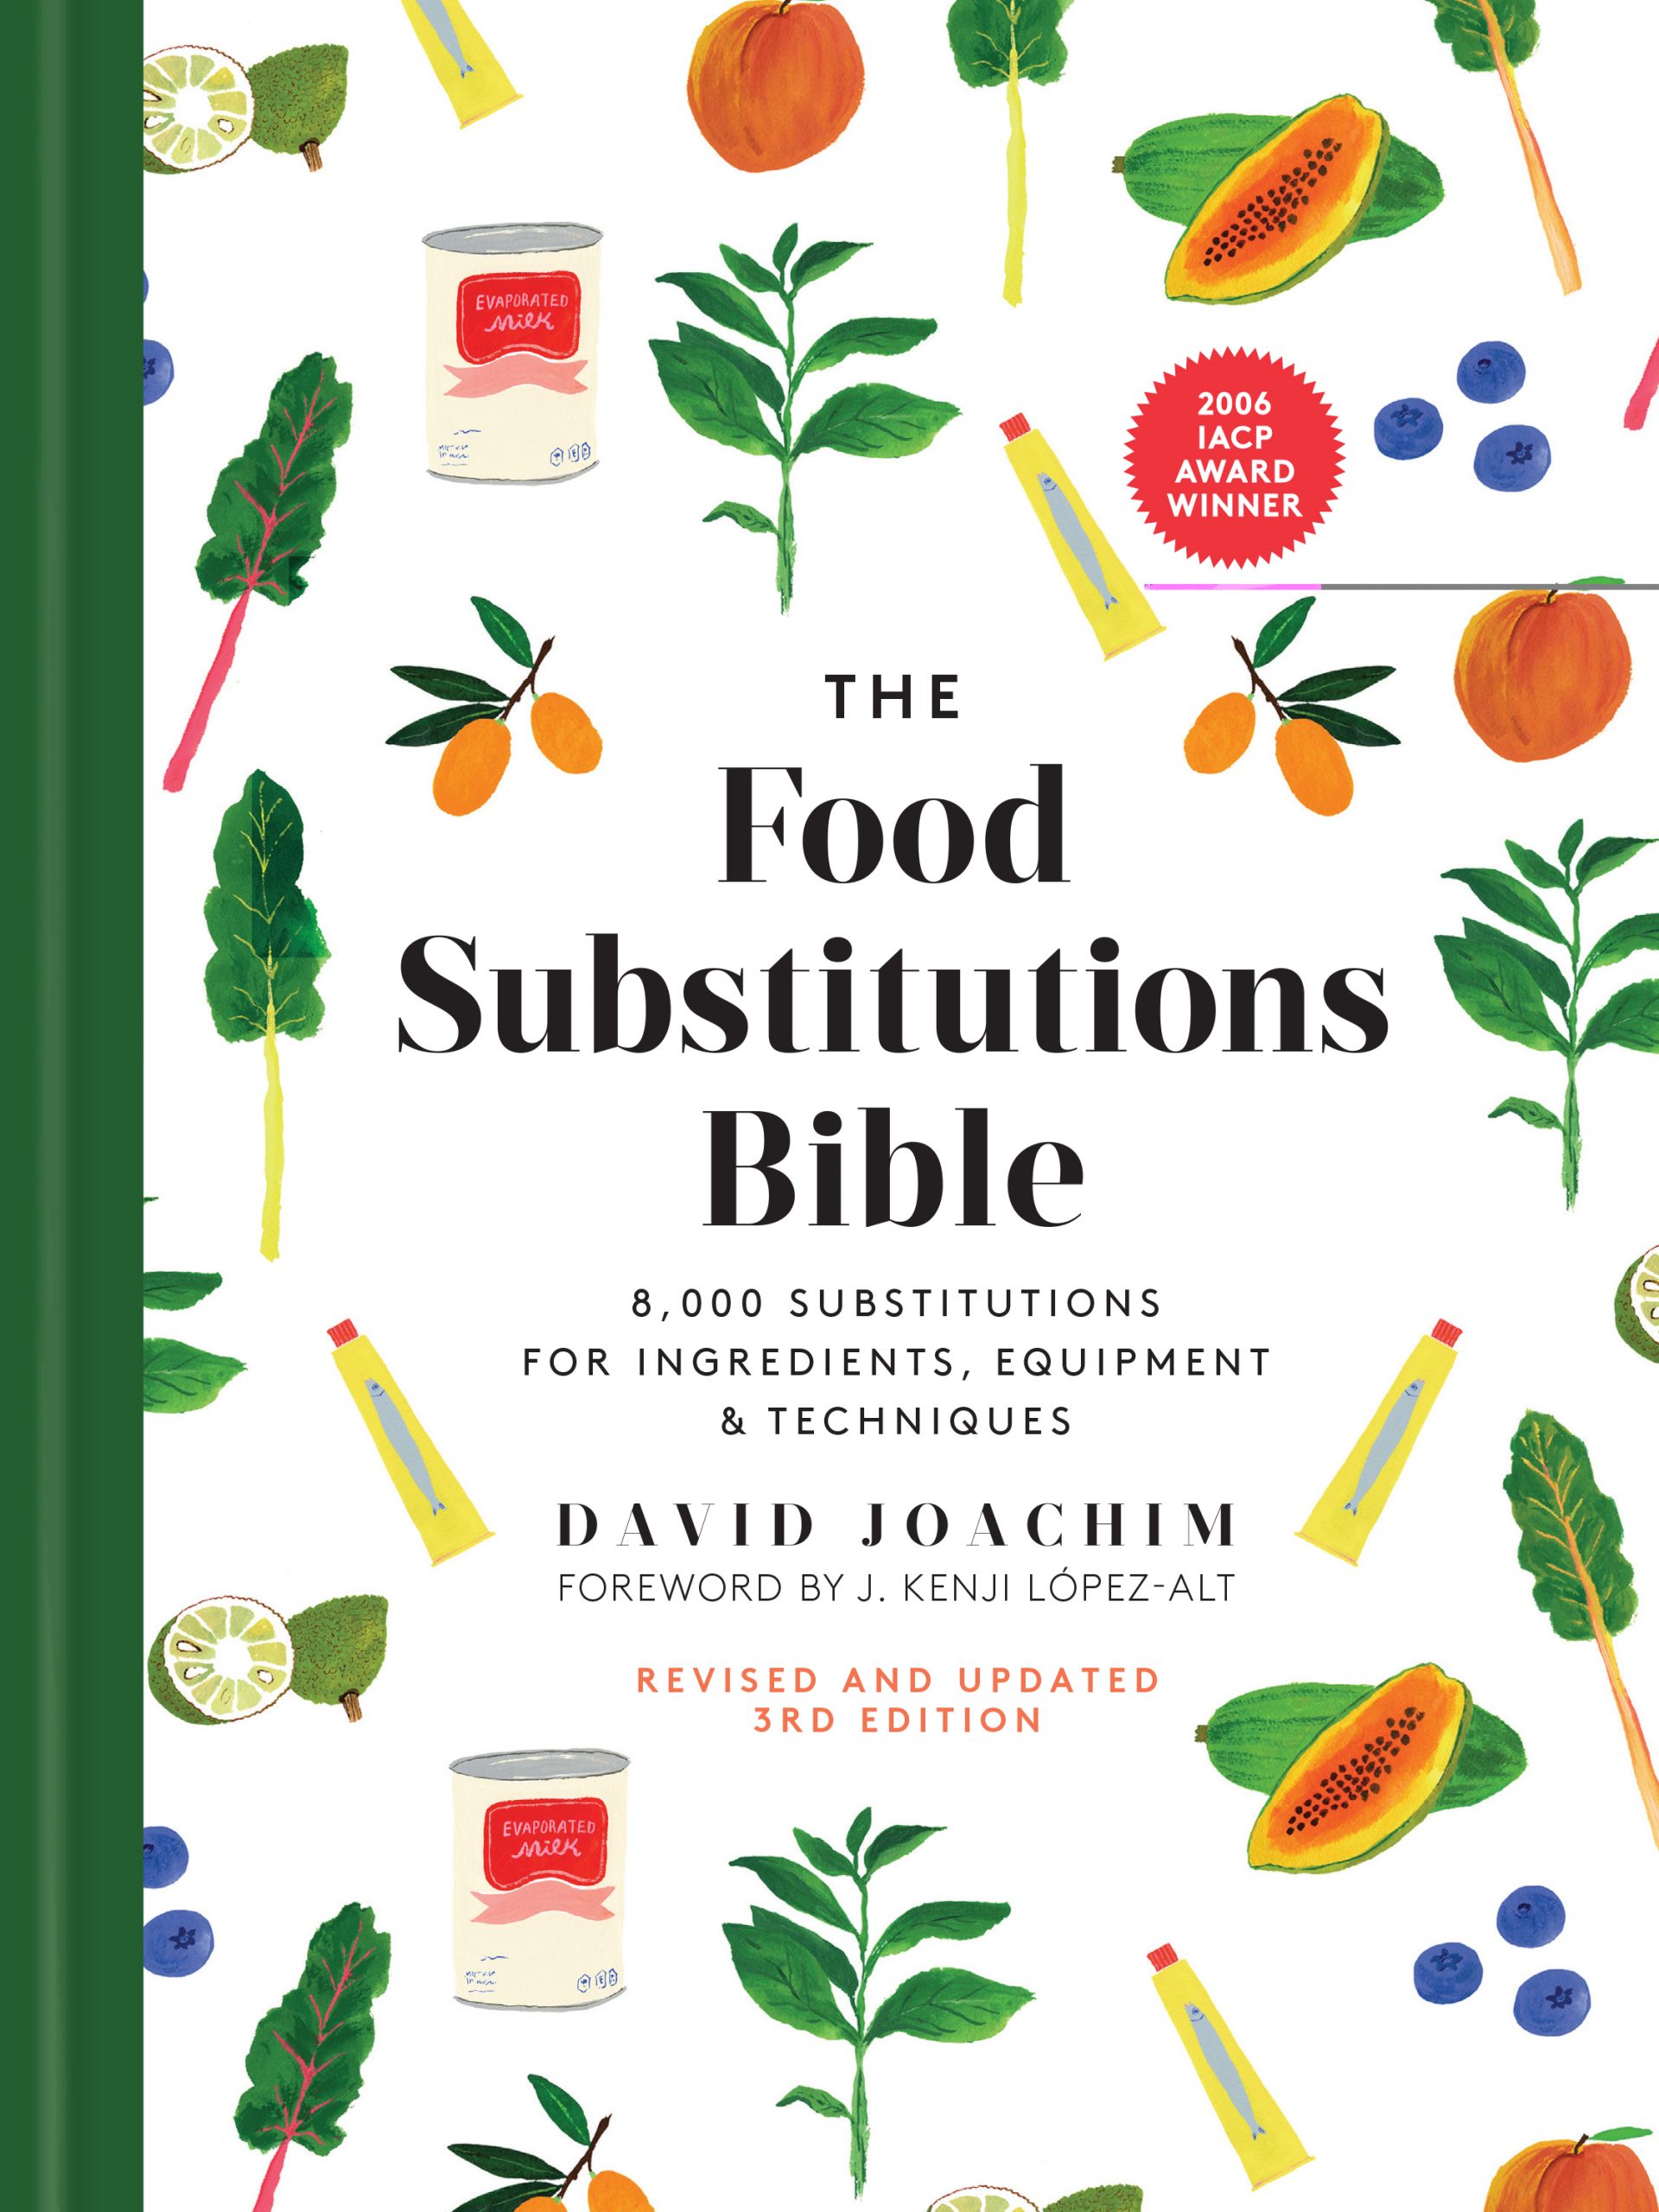 Book Cover for THE FOOD SUBSTITUTIONS BIBLE by Dave Joachim